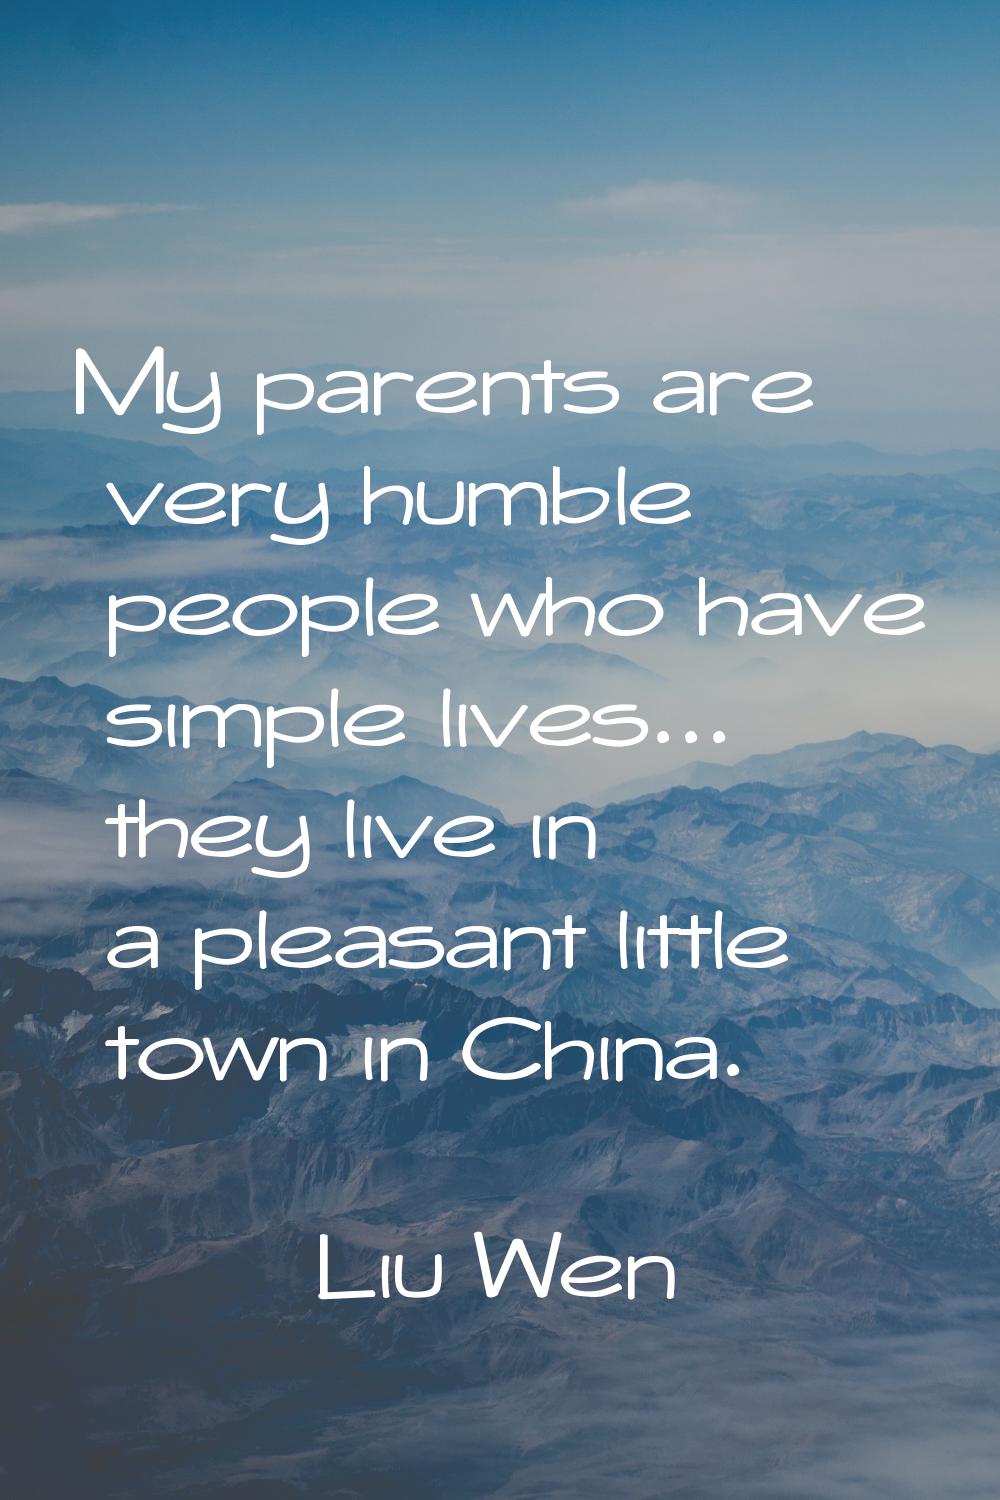 My parents are very humble people who have simple lives... they live in a pleasant little town in C